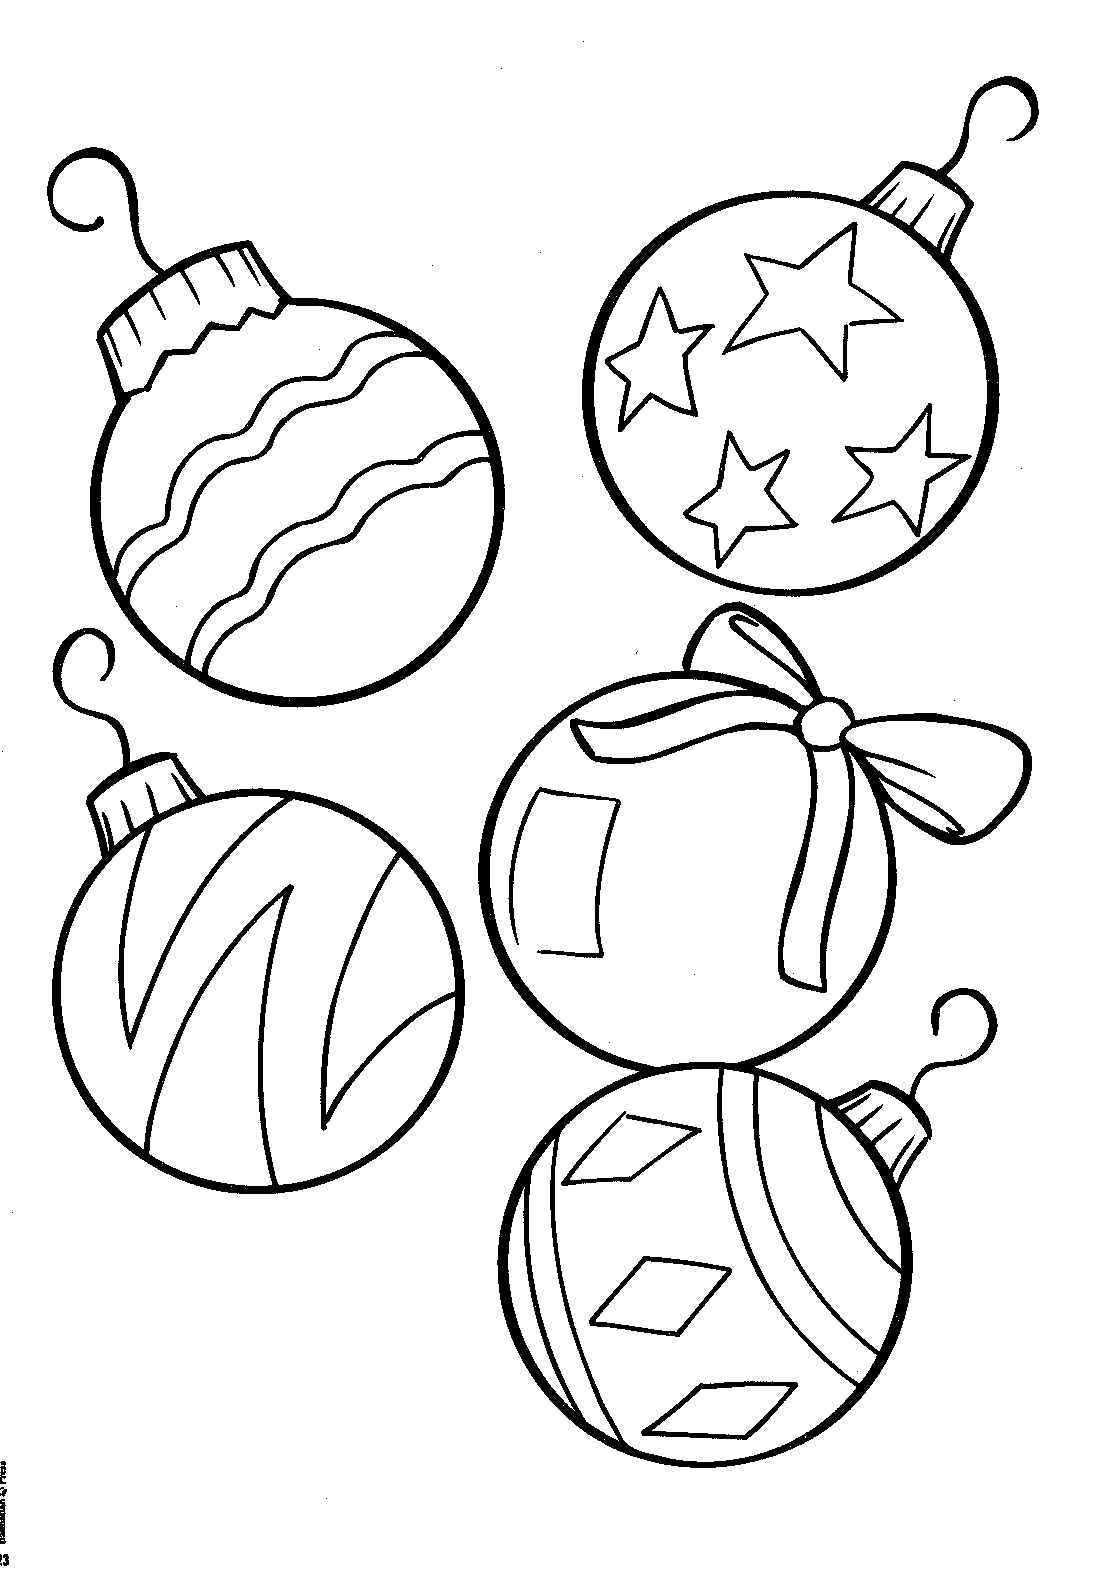 clipart of christmas ornaments to color Clipground